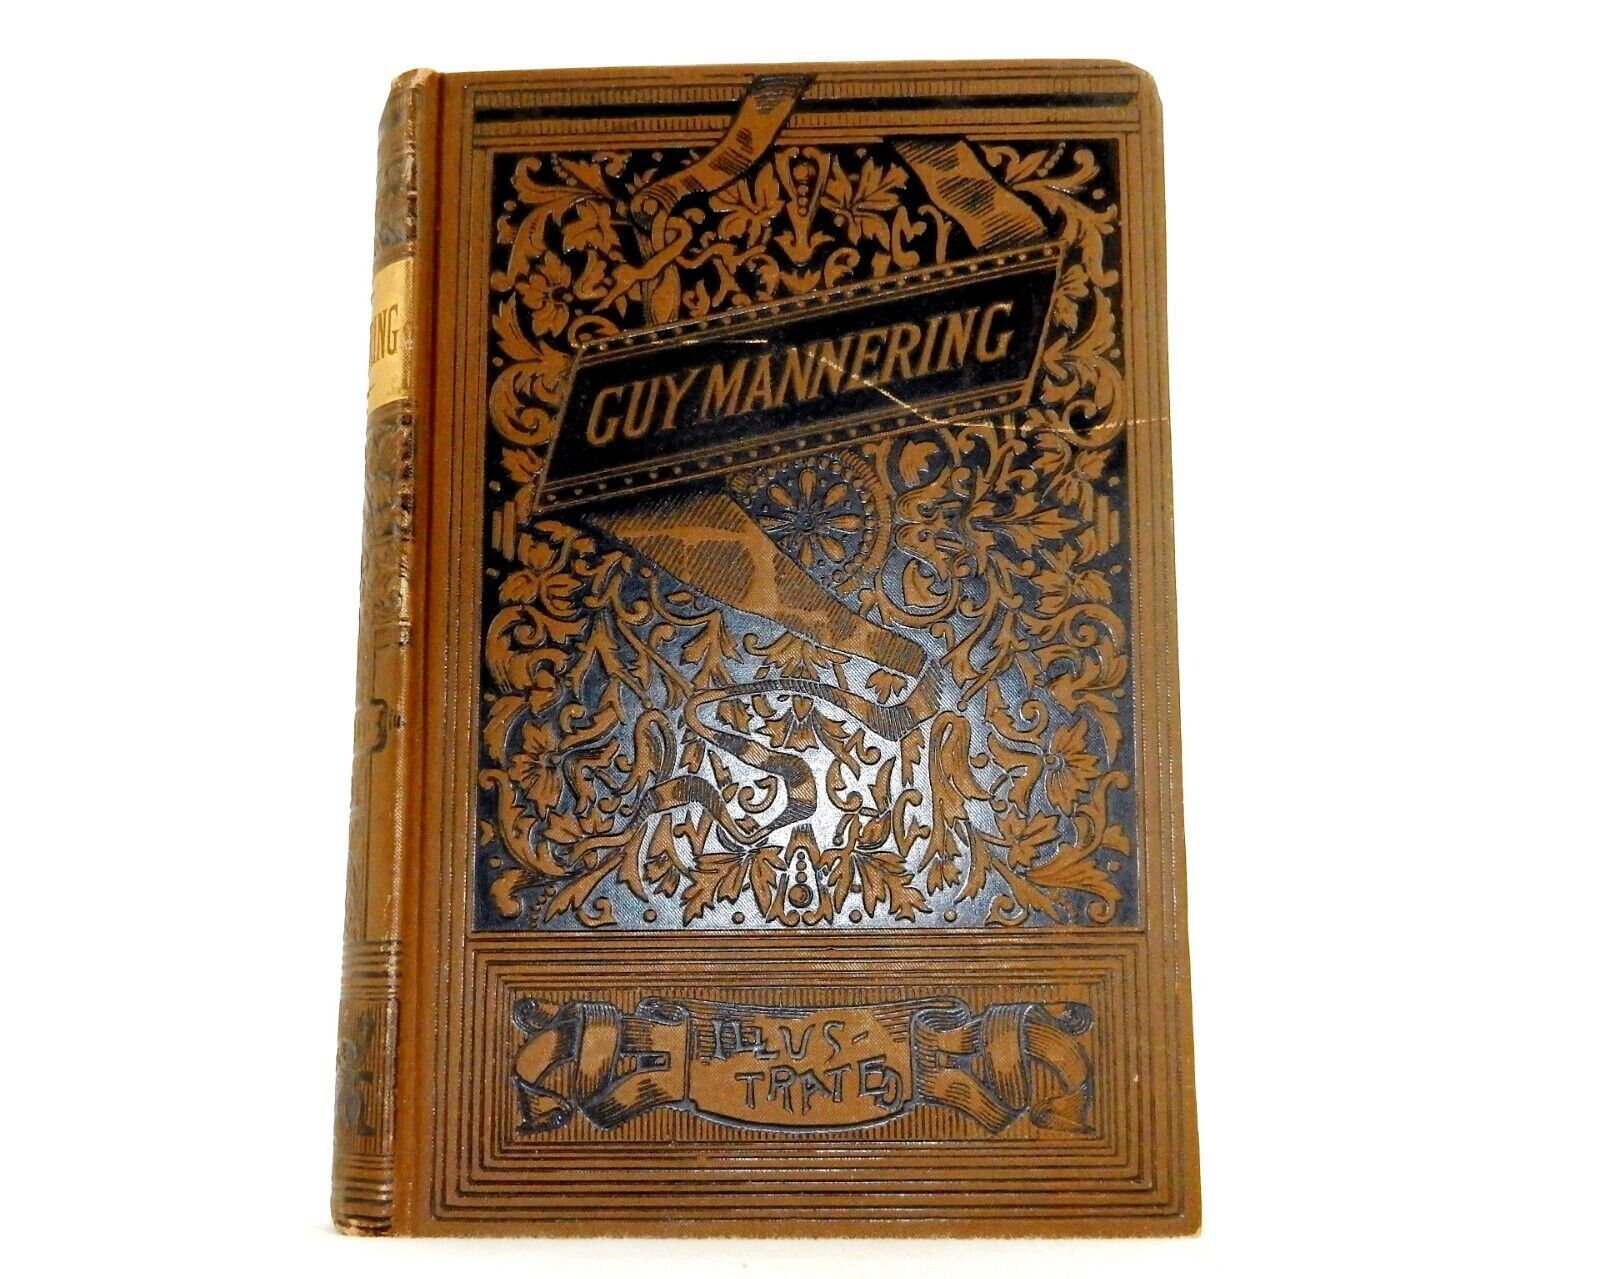 Primary image for "Guy Mannering", by Walter Scott, Hardcover, Published 1879, George Routledge